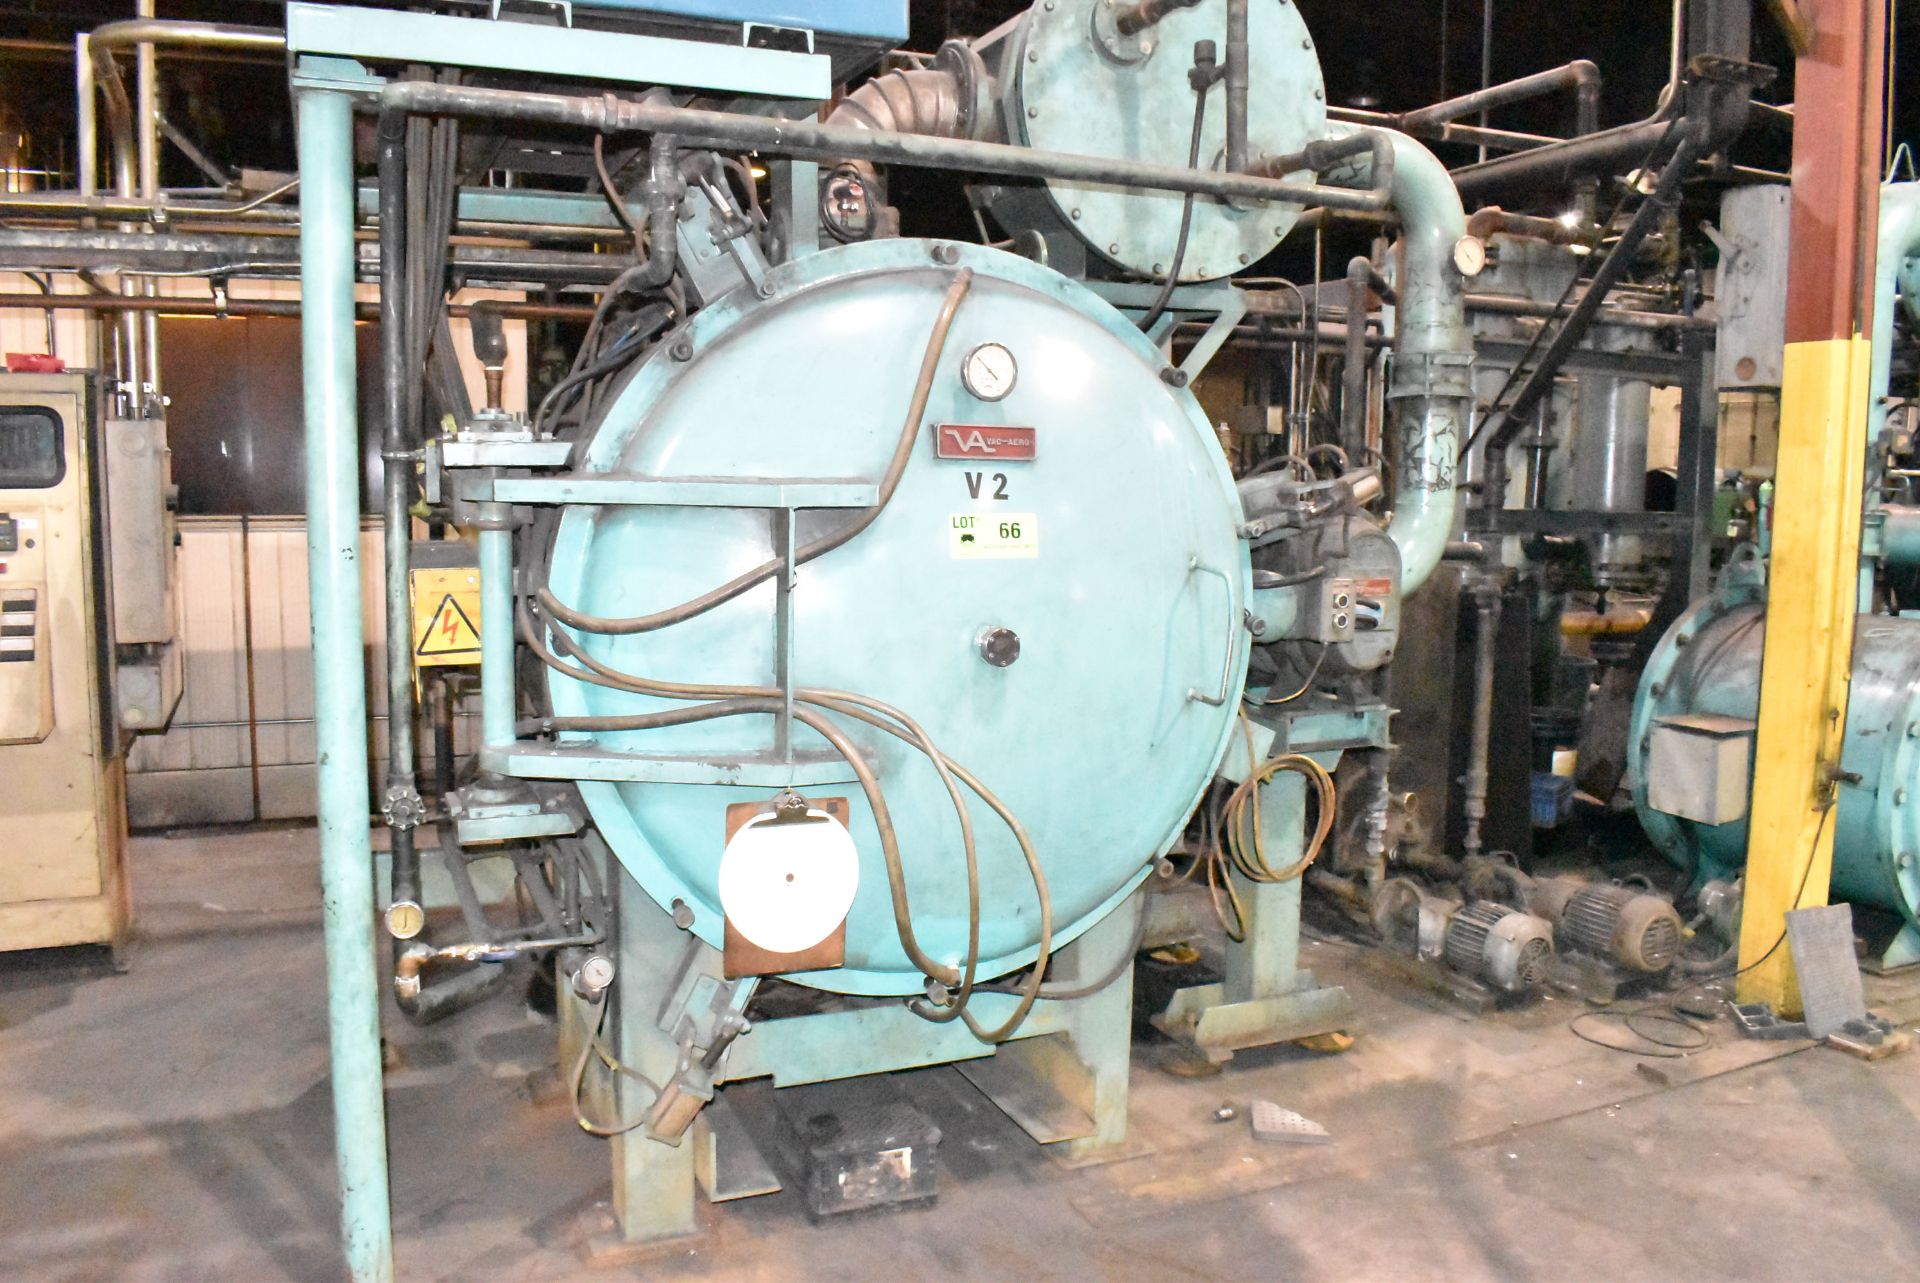 VAC-AERO VAH 3436 MP - 2-BAR QUENCH CAPABILITY ELECTRIC VACUUM FURNACE WITH 2,400 DEGREES F MAX - Image 3 of 15